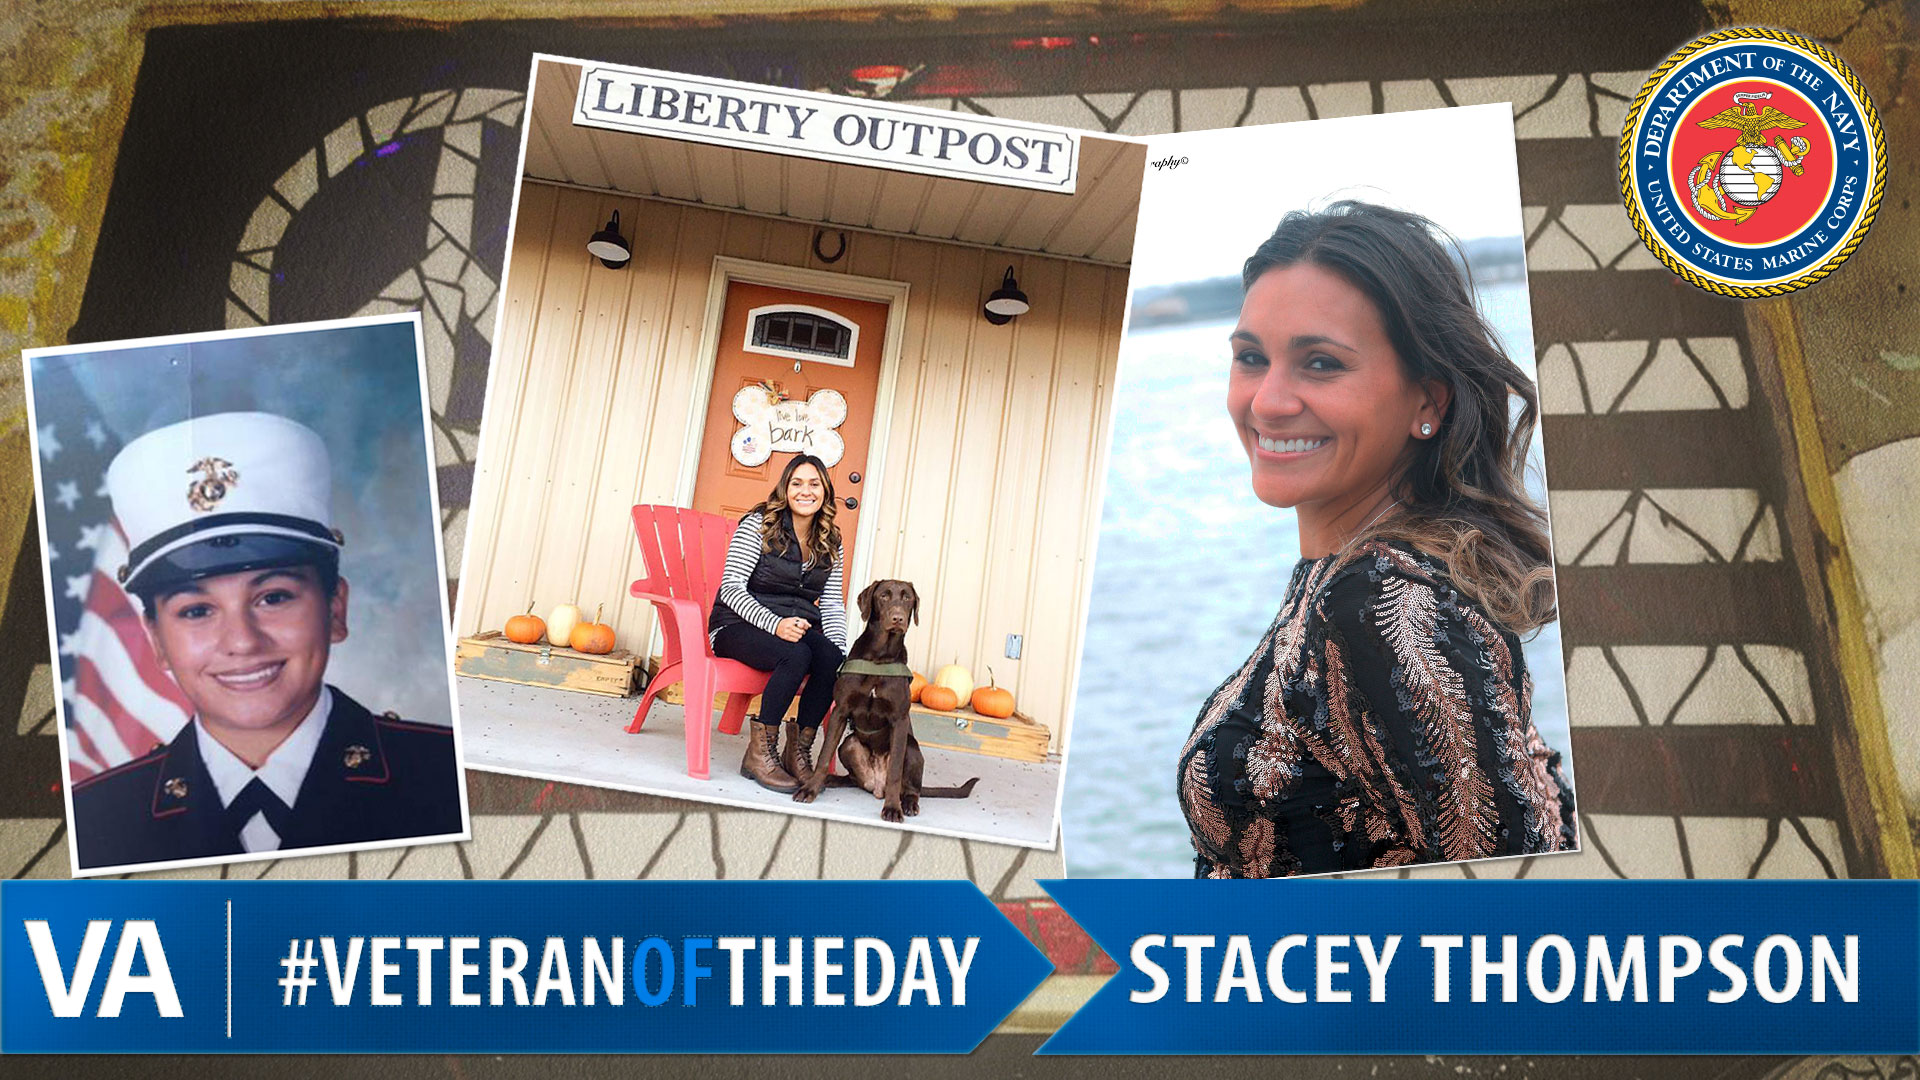 Stacey Thompson - Veteran of the Day